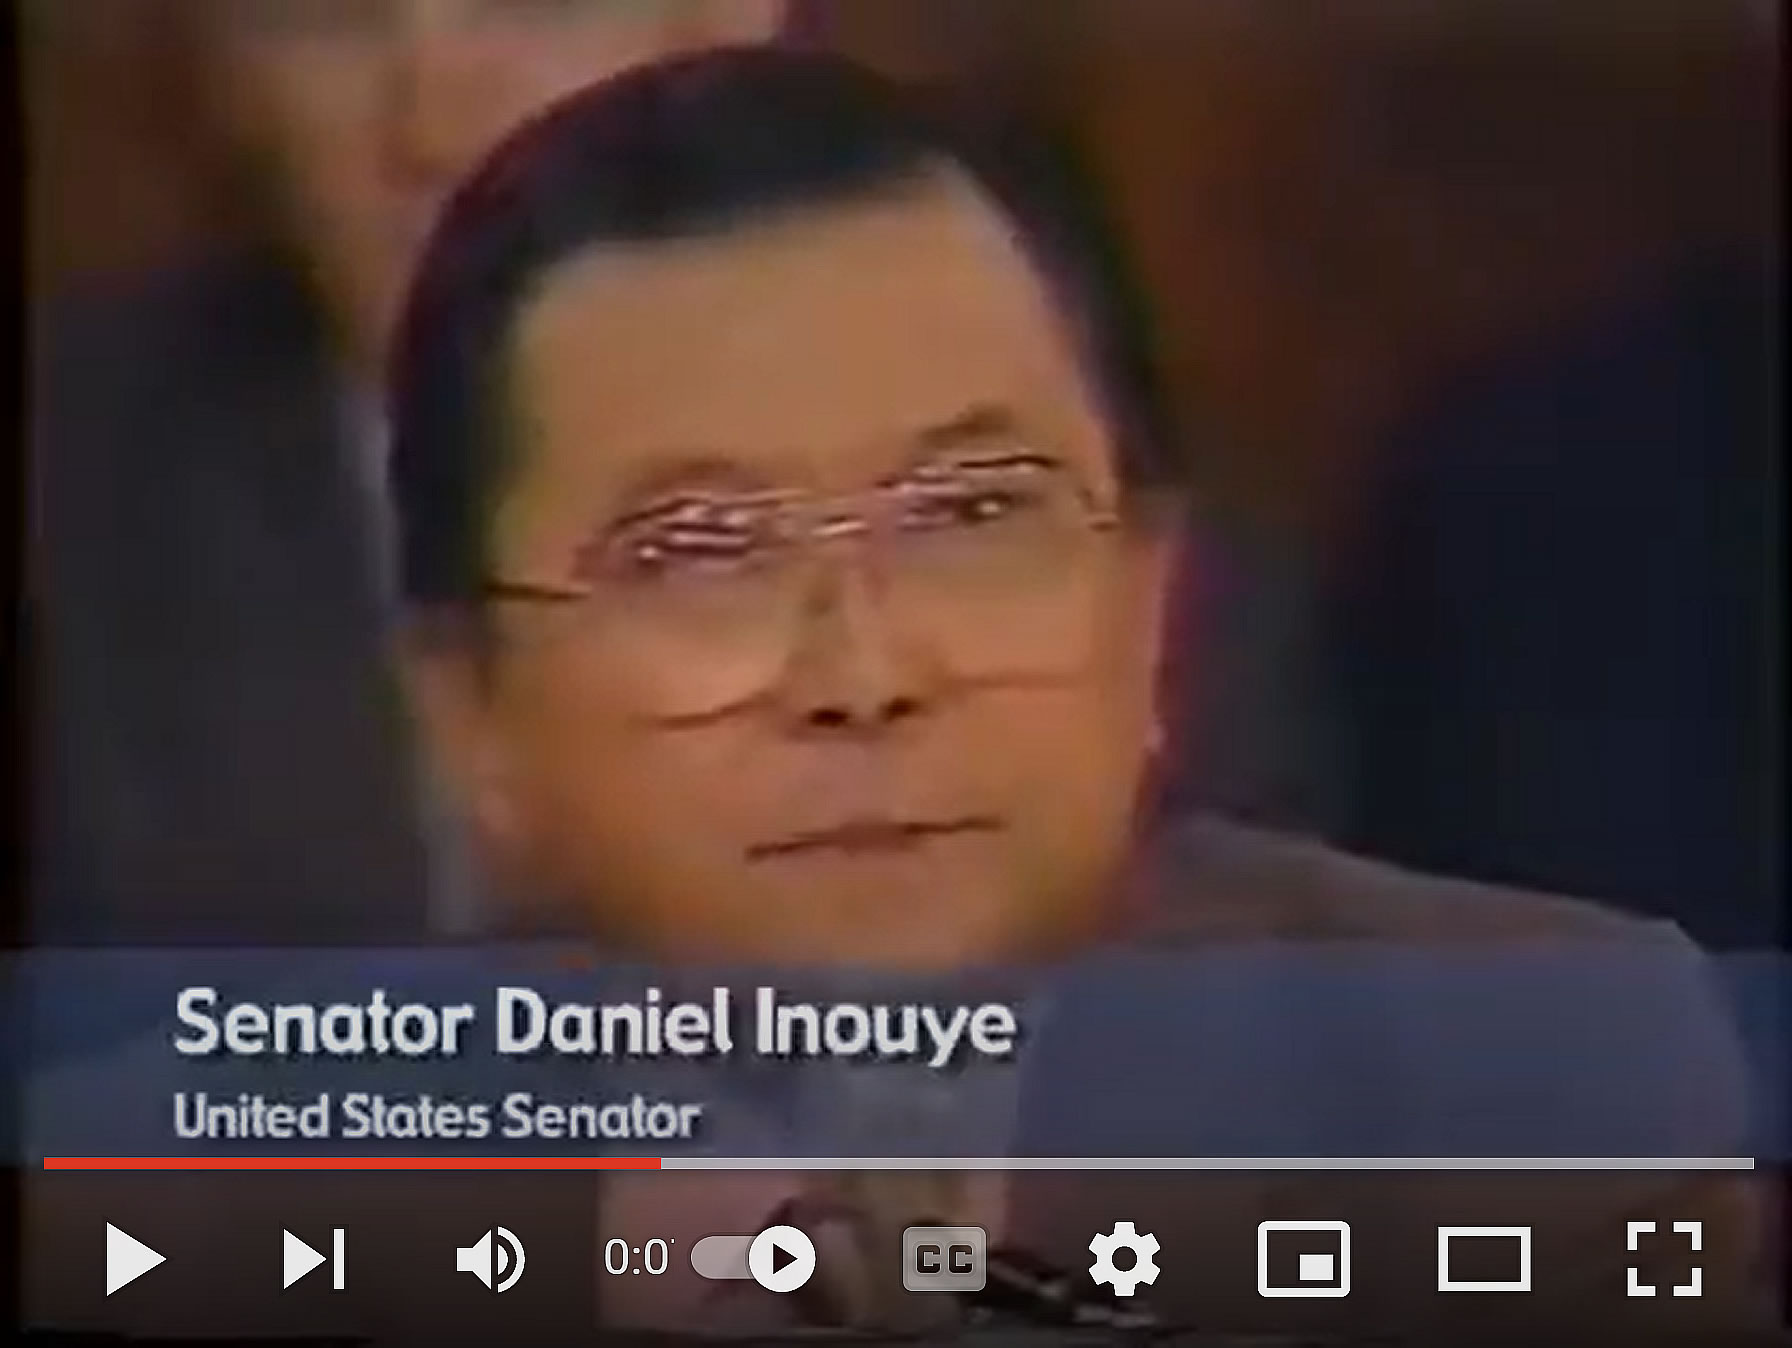 Senator Daniel Inouye (D-HI) exposed "a shadowy goverment" in 1987. This speech was given just nine years after the Senior Executive Service (SES) was formed.